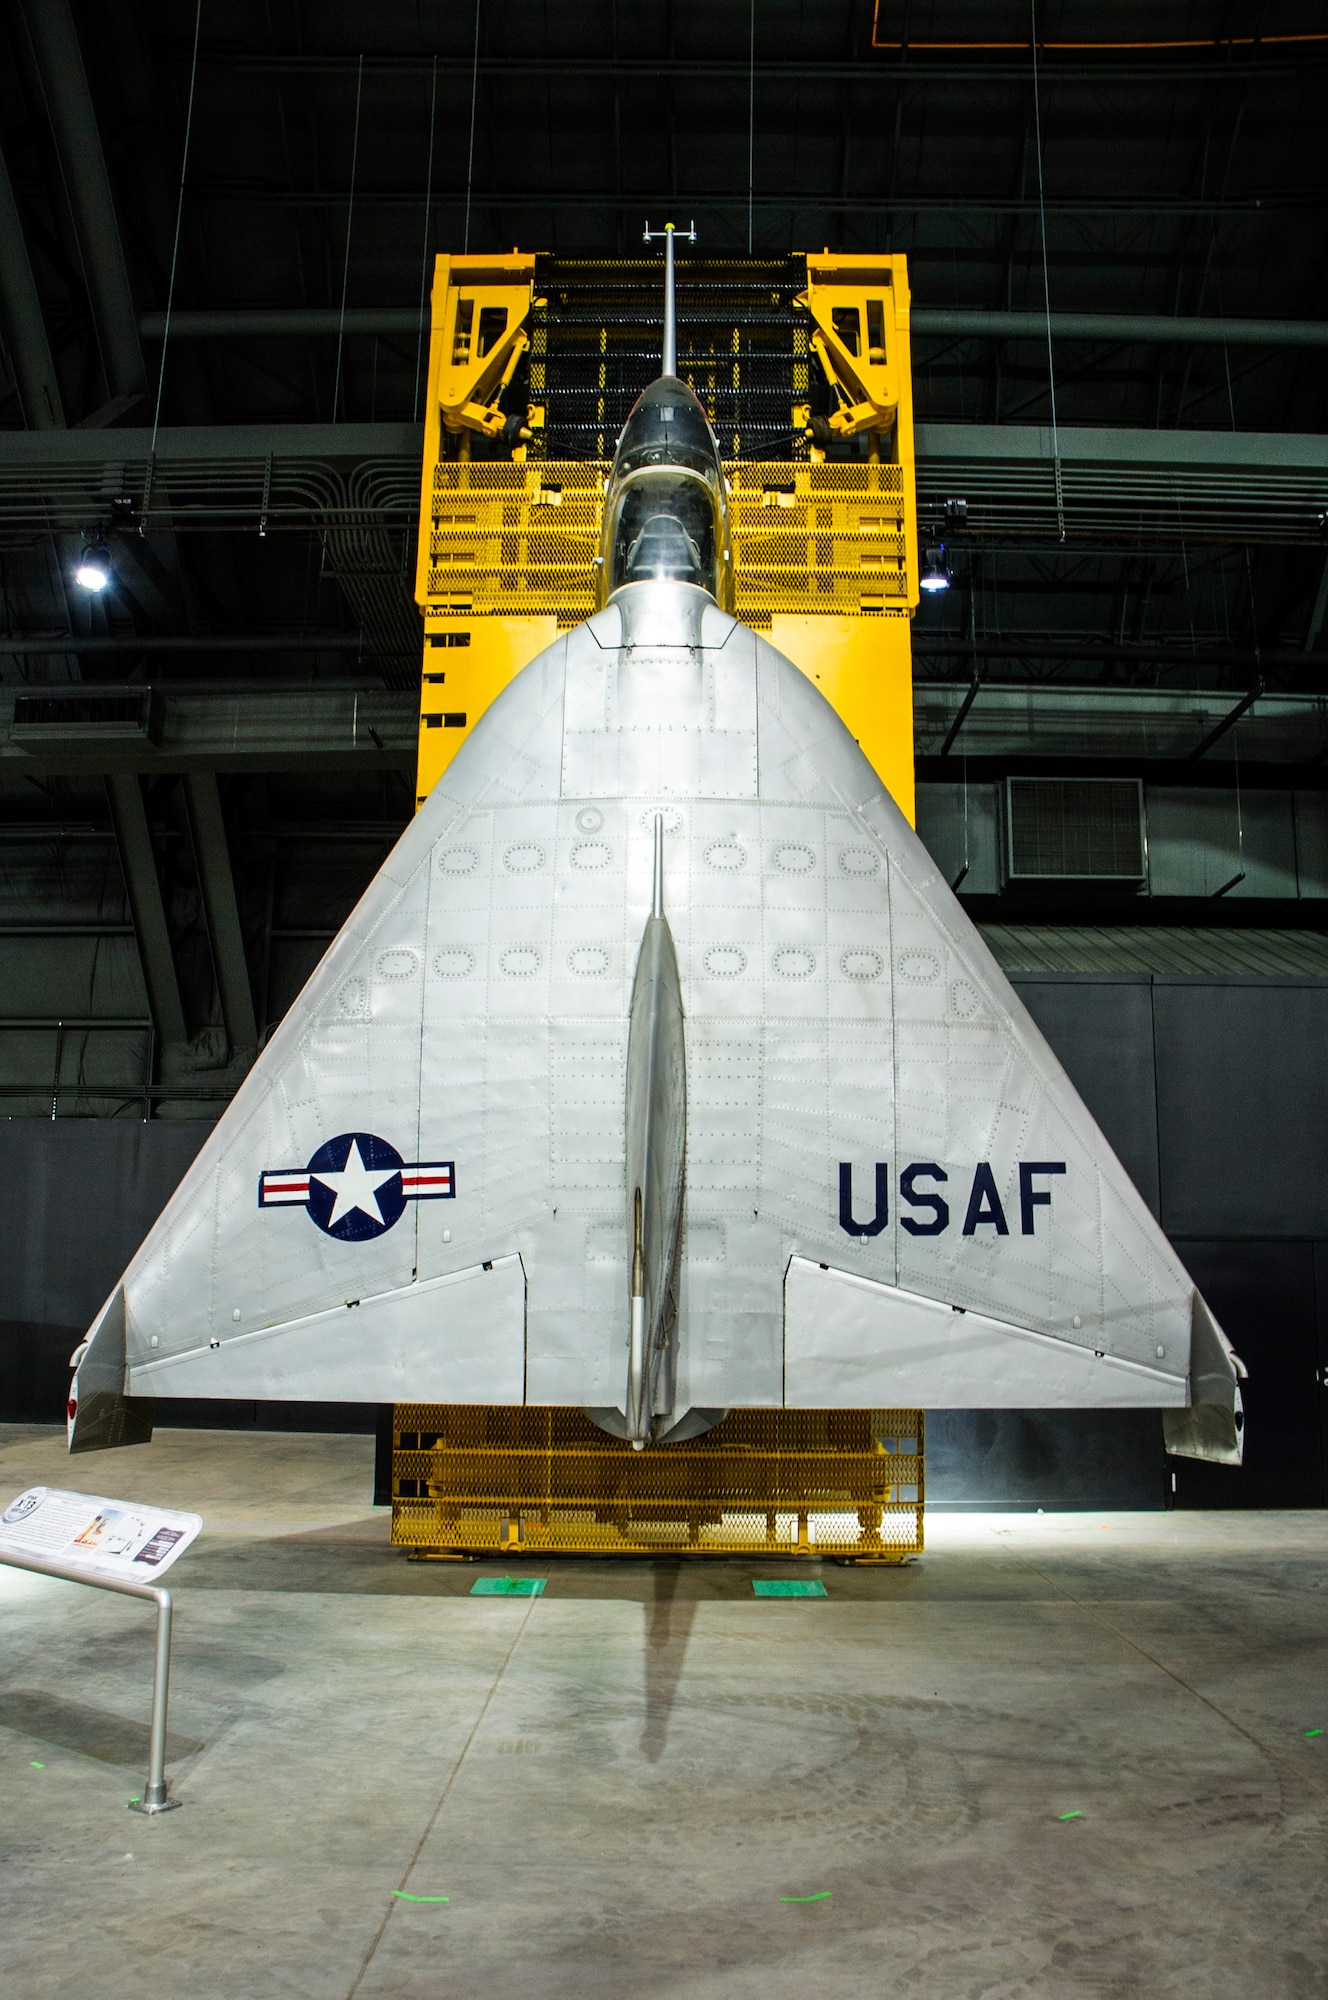 DAYTON, Ohio -- Ryan X-13 Vertijet on display in the Research & Development Gallery at the National Museum of the U.S. Air Force. (U.S. Air Force photo by Ken LaRock)